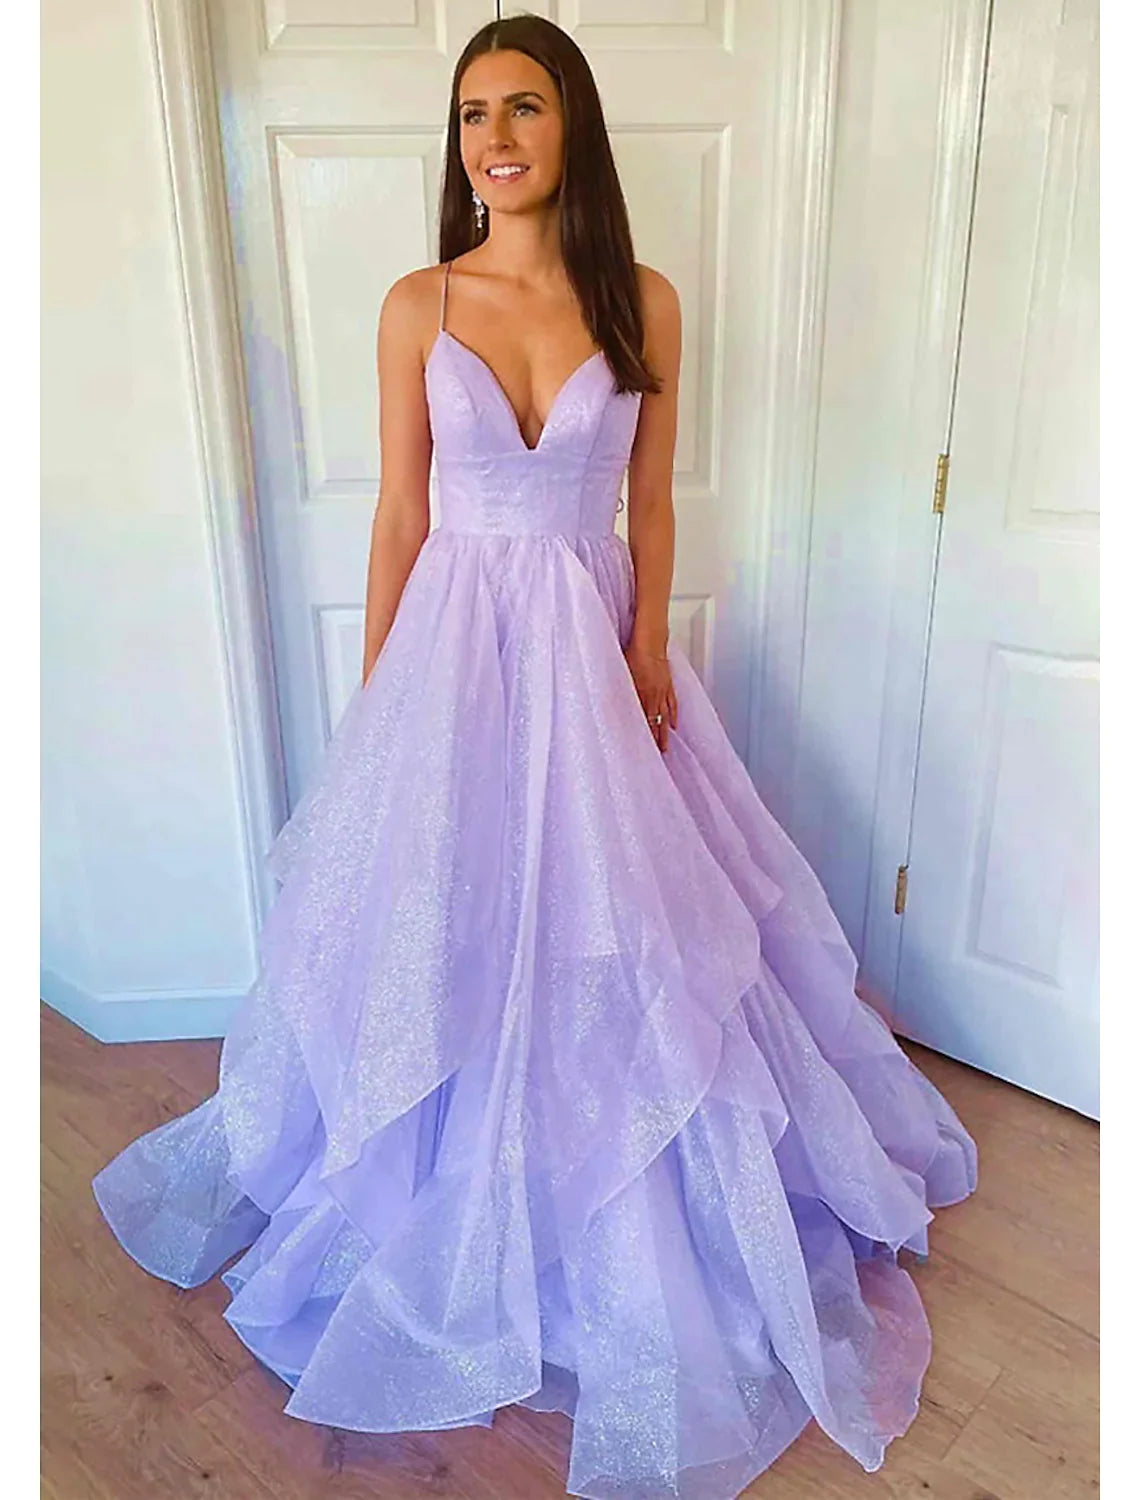 Prom Dresses Glittering Dress Wedding Party Sleeveless Strap Tulle Backless with Sequin Ruffle